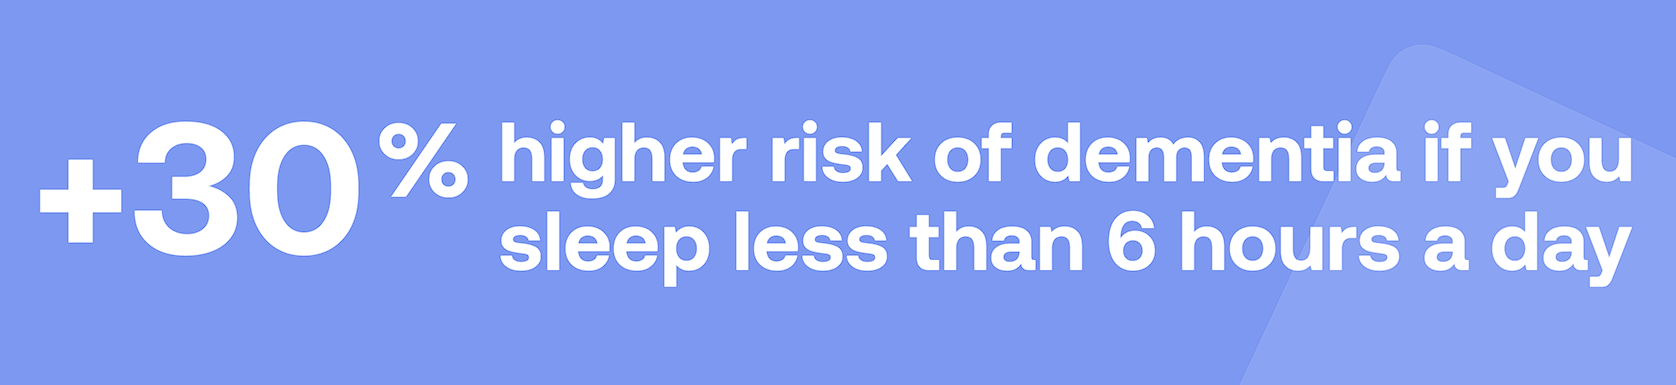 +30% higher risk of dementia if you sleep less than 6 hours a day